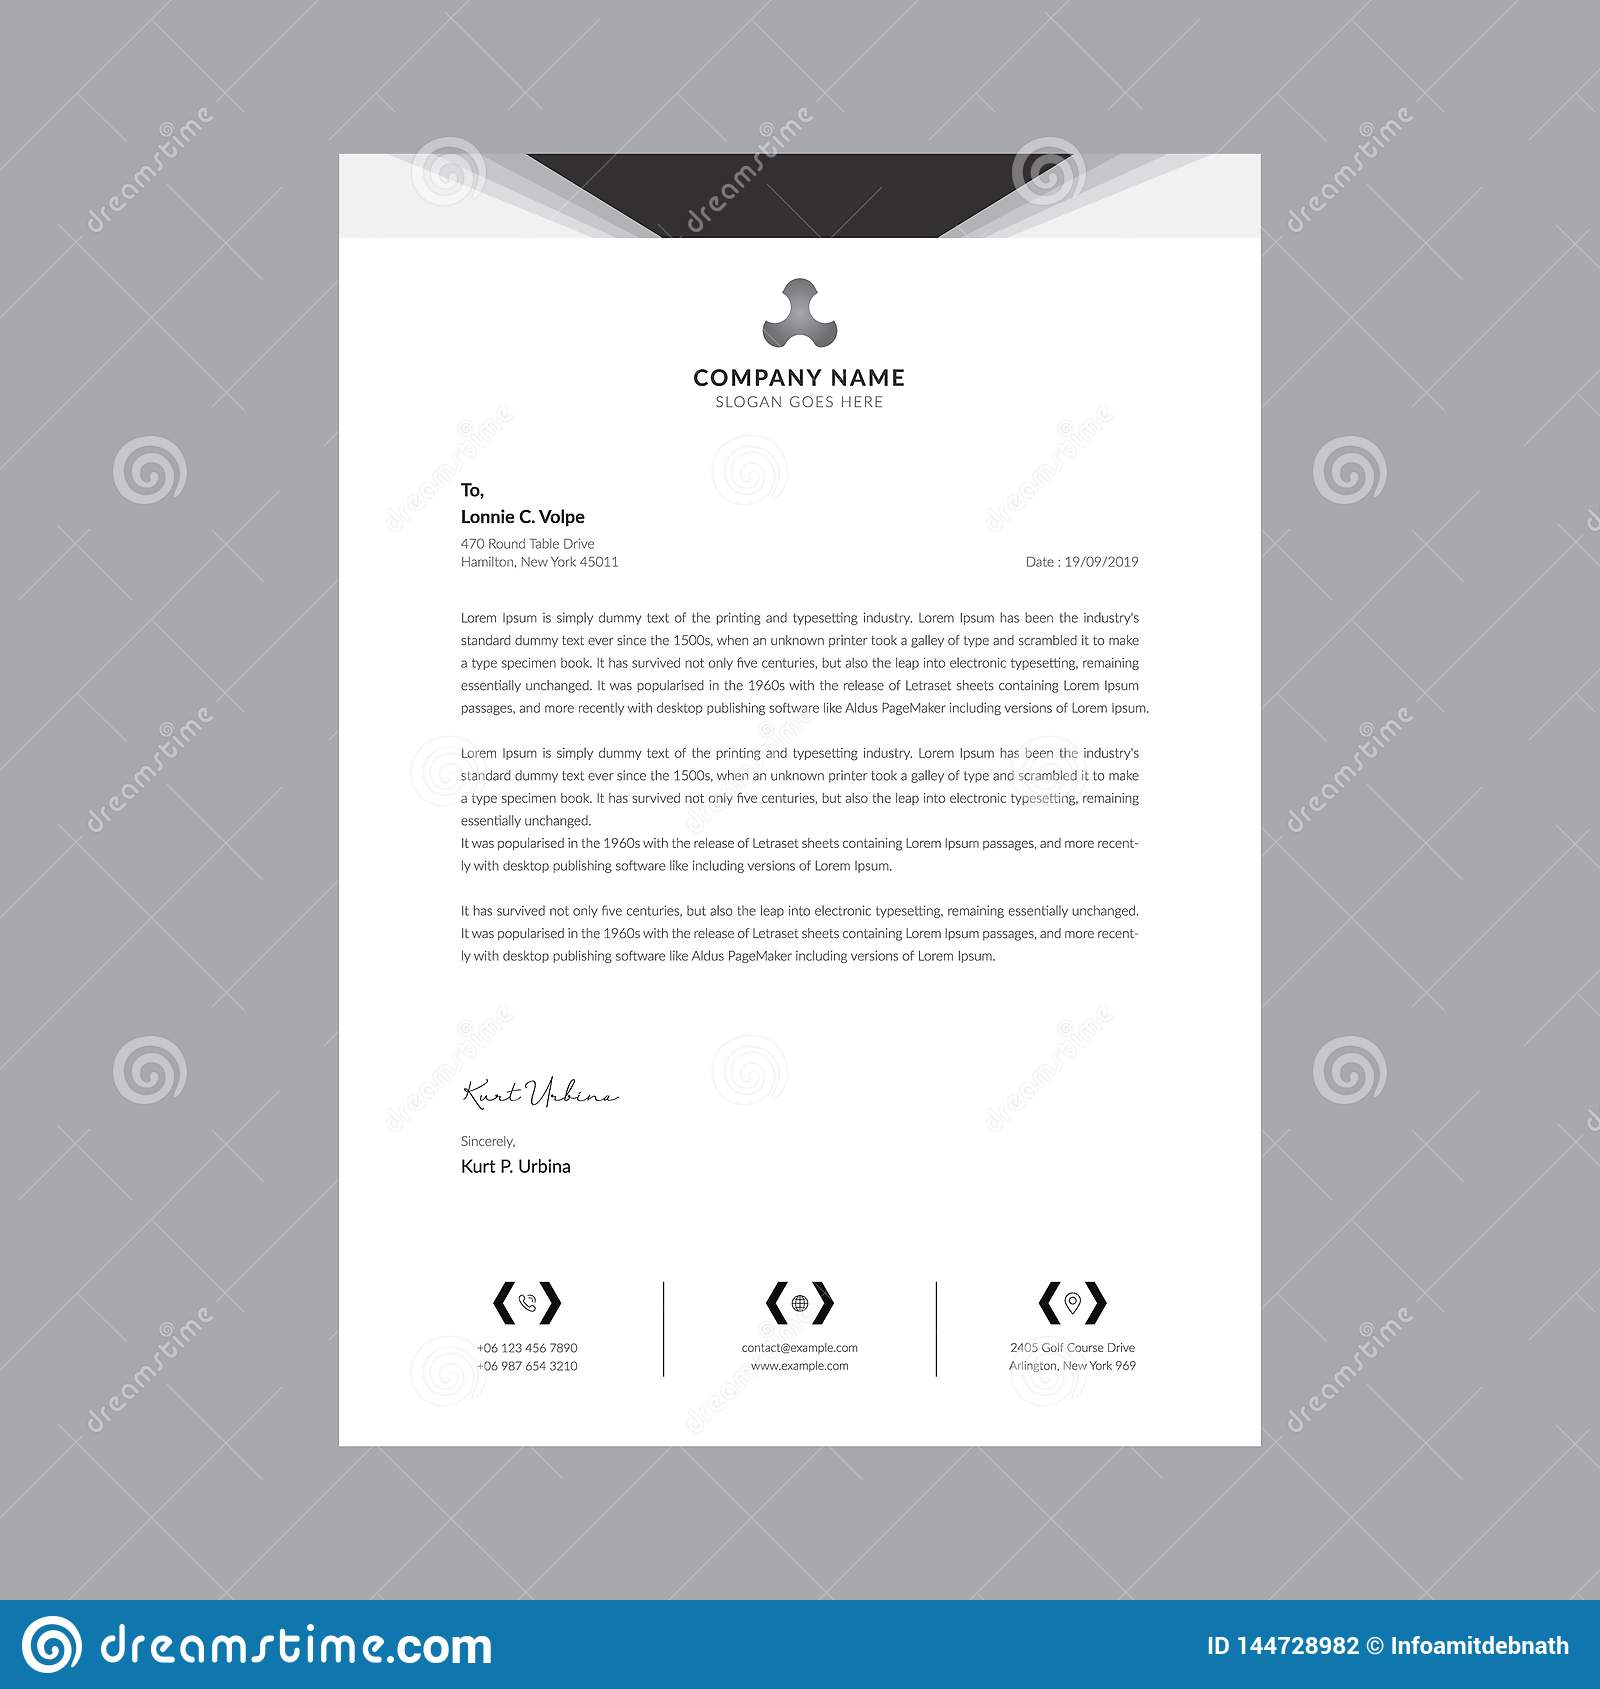 Black And White Business Letterhead Templates Stock Vector With Regard To Legal Letterhead Templates Free